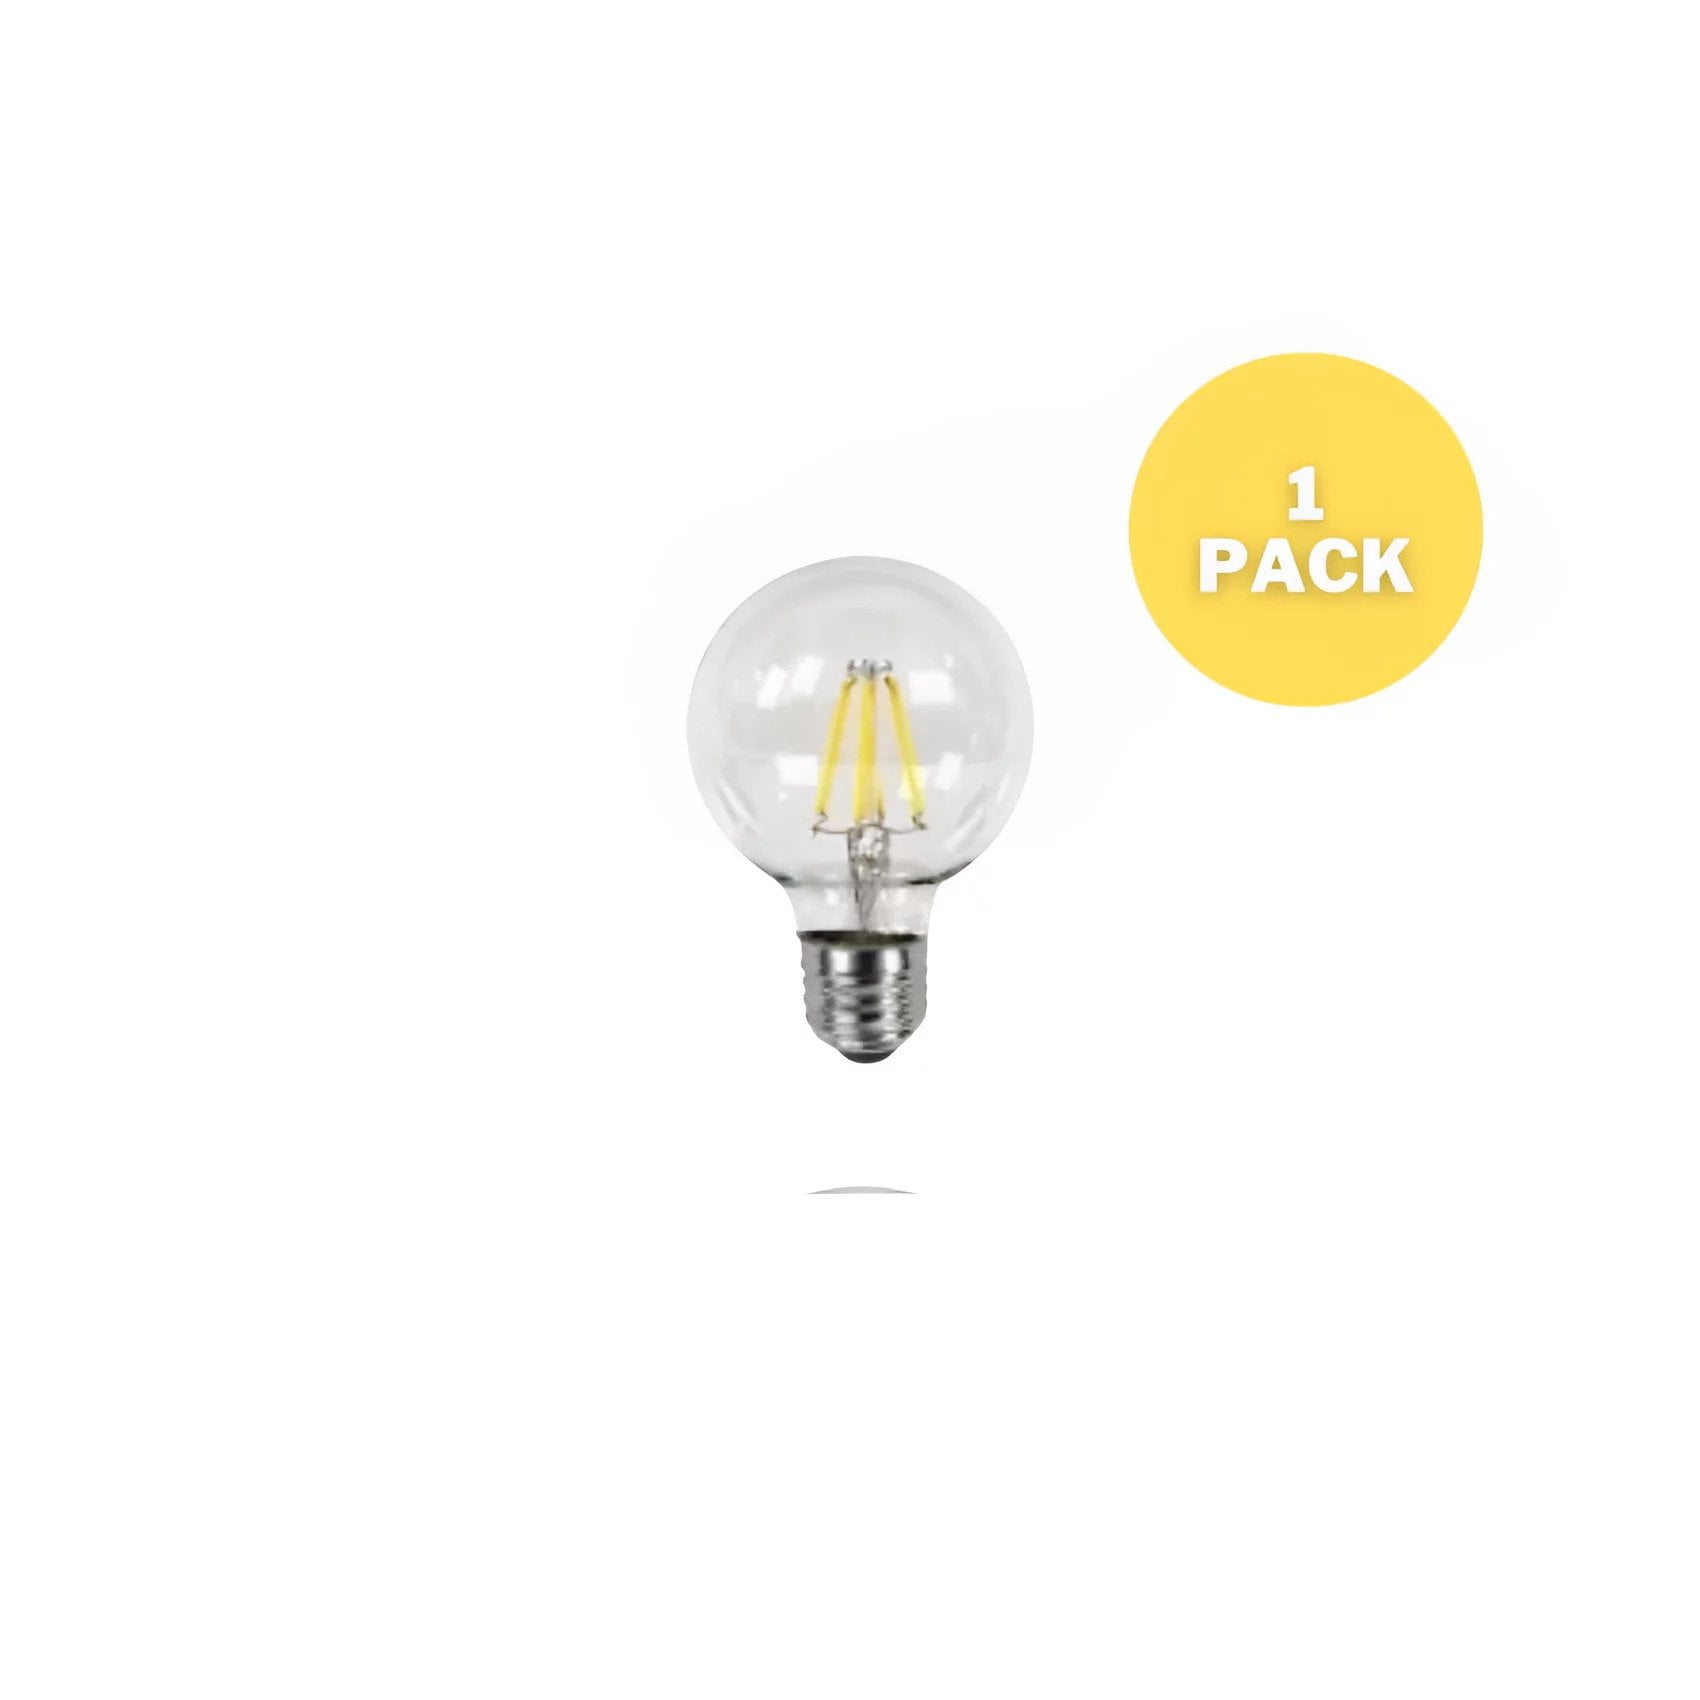 Erobring dissipation Forvirret Impressions Vanity 4W Clear LED Light Bulb, G25 Globe Shape, Dimmable LED  Lights, Energy Efficient Smart Light Bulbs with 5000k Bright White  Temperature for Mirror, Bedroom Decor, Decoration - Walmart.com